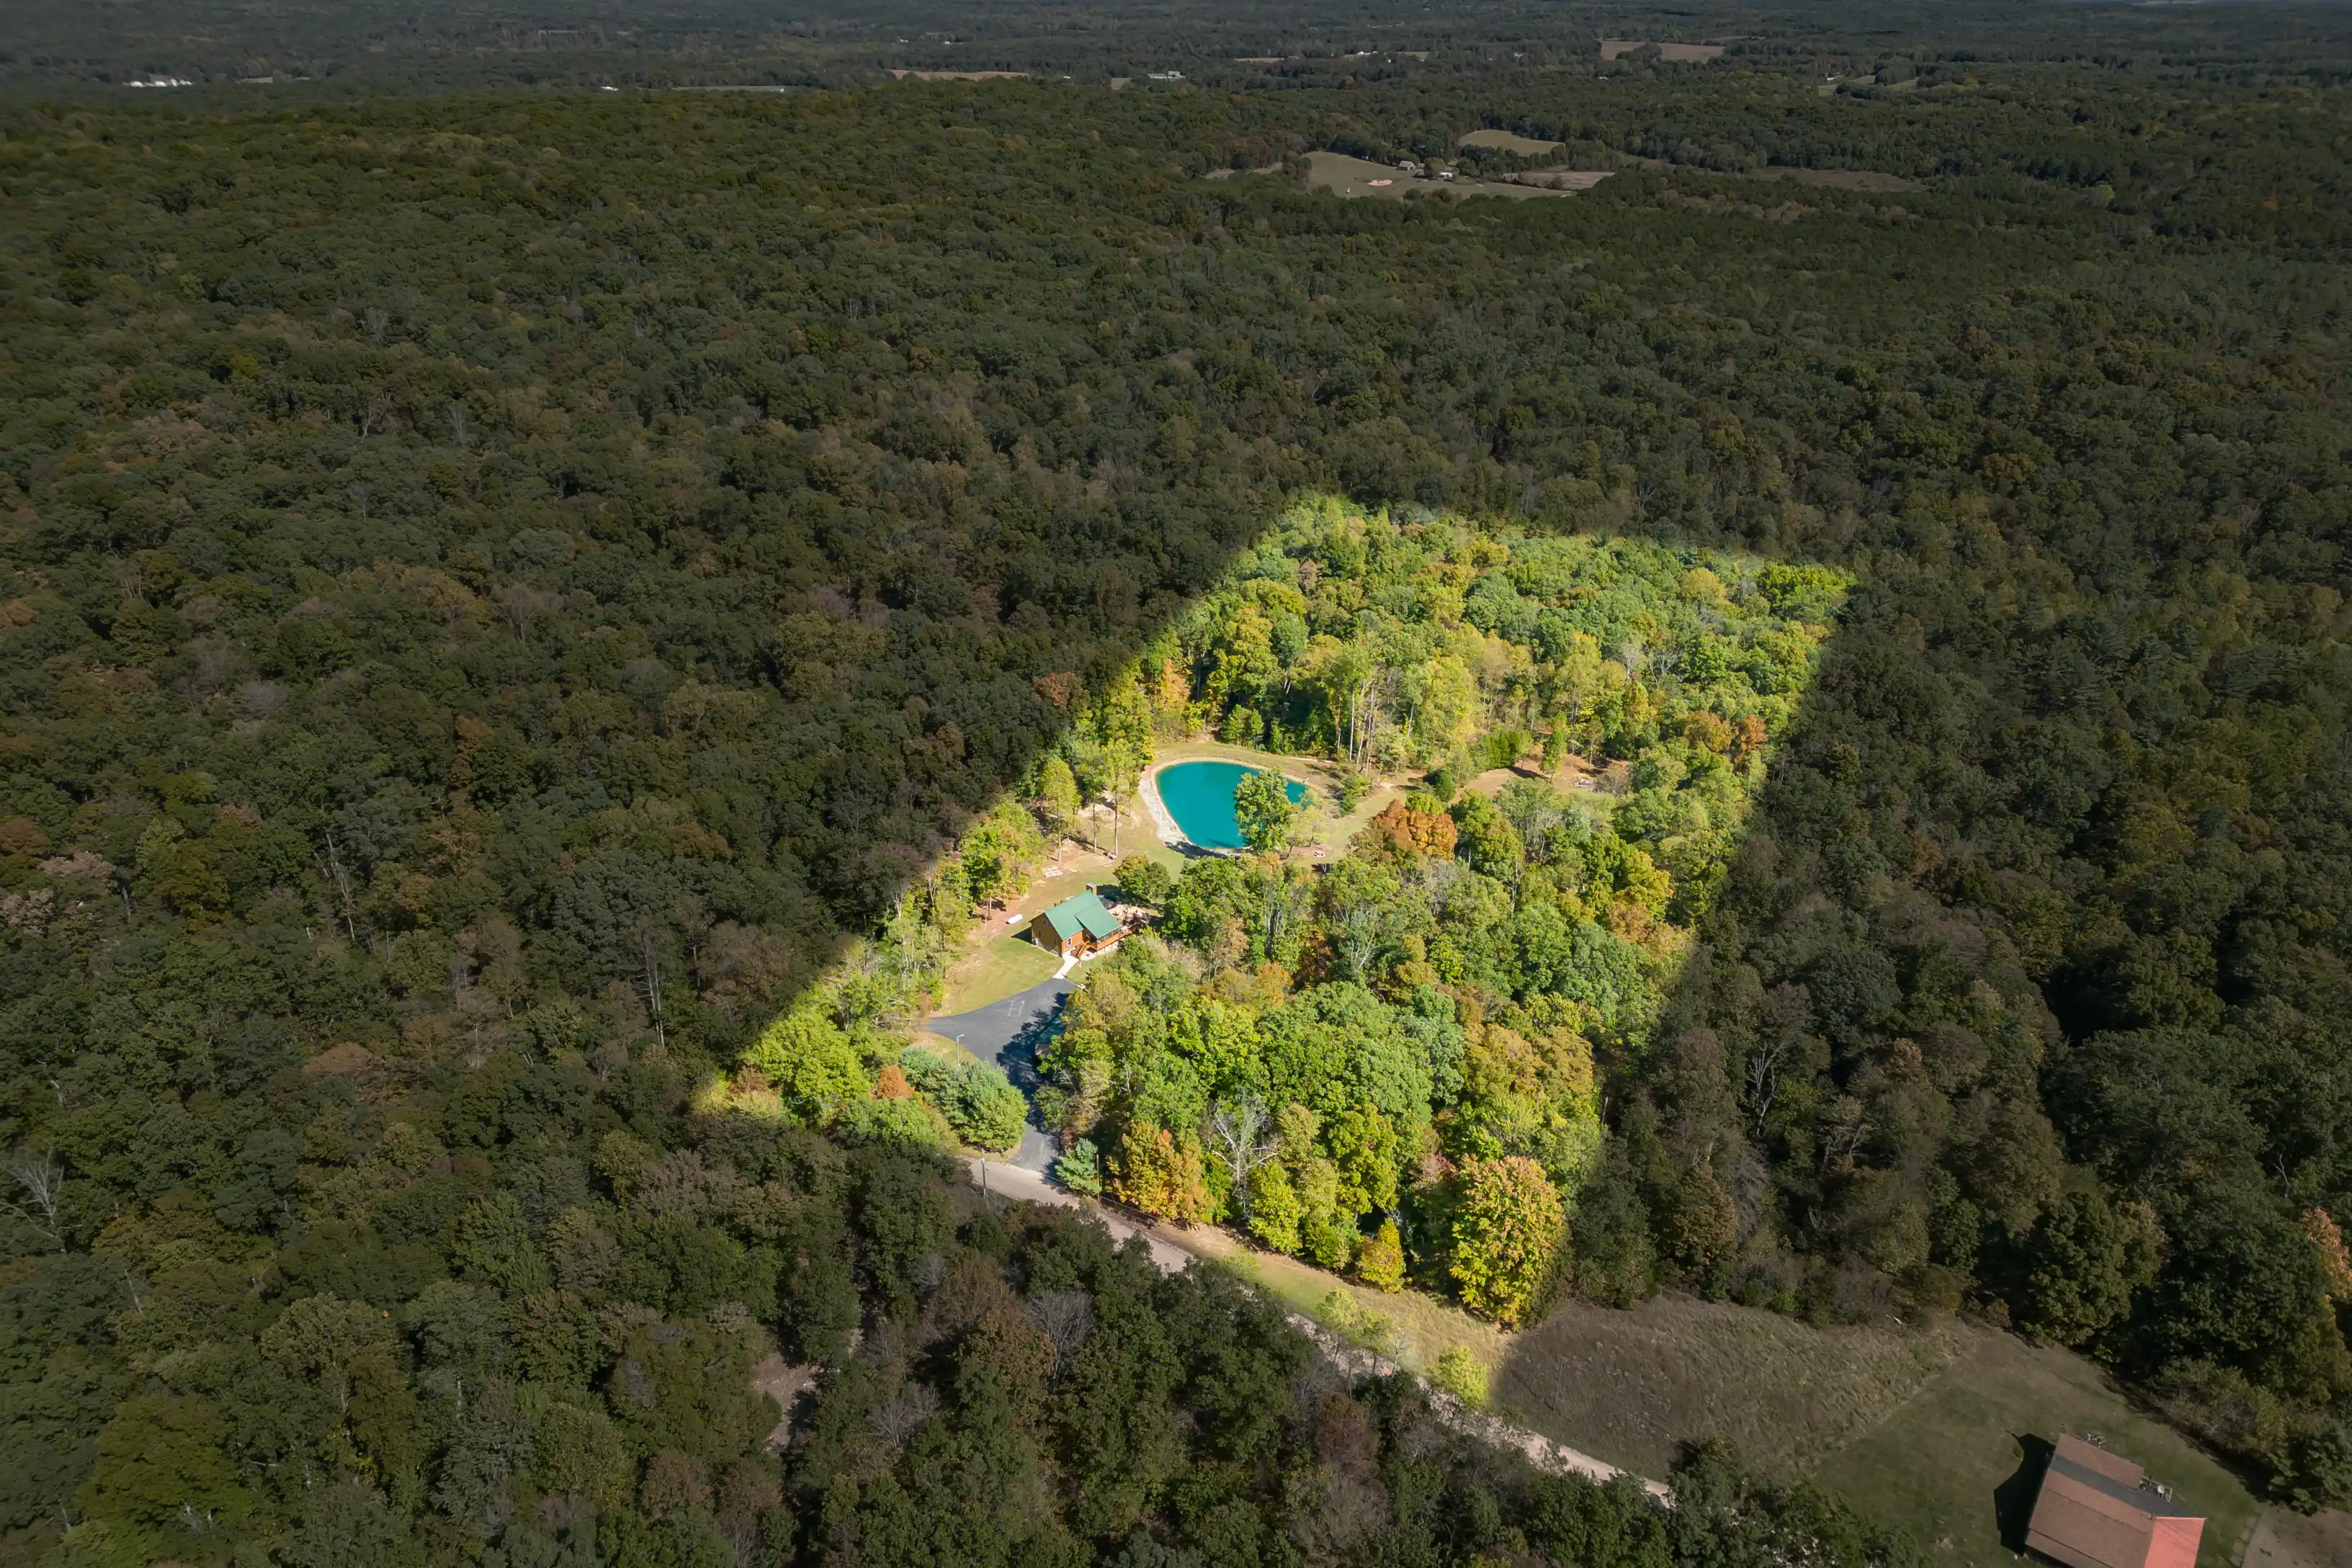 Aerial view of a kidney-shaped swimming pool amidst a forest clearing with a building close by and vast forest extending into the horizon.